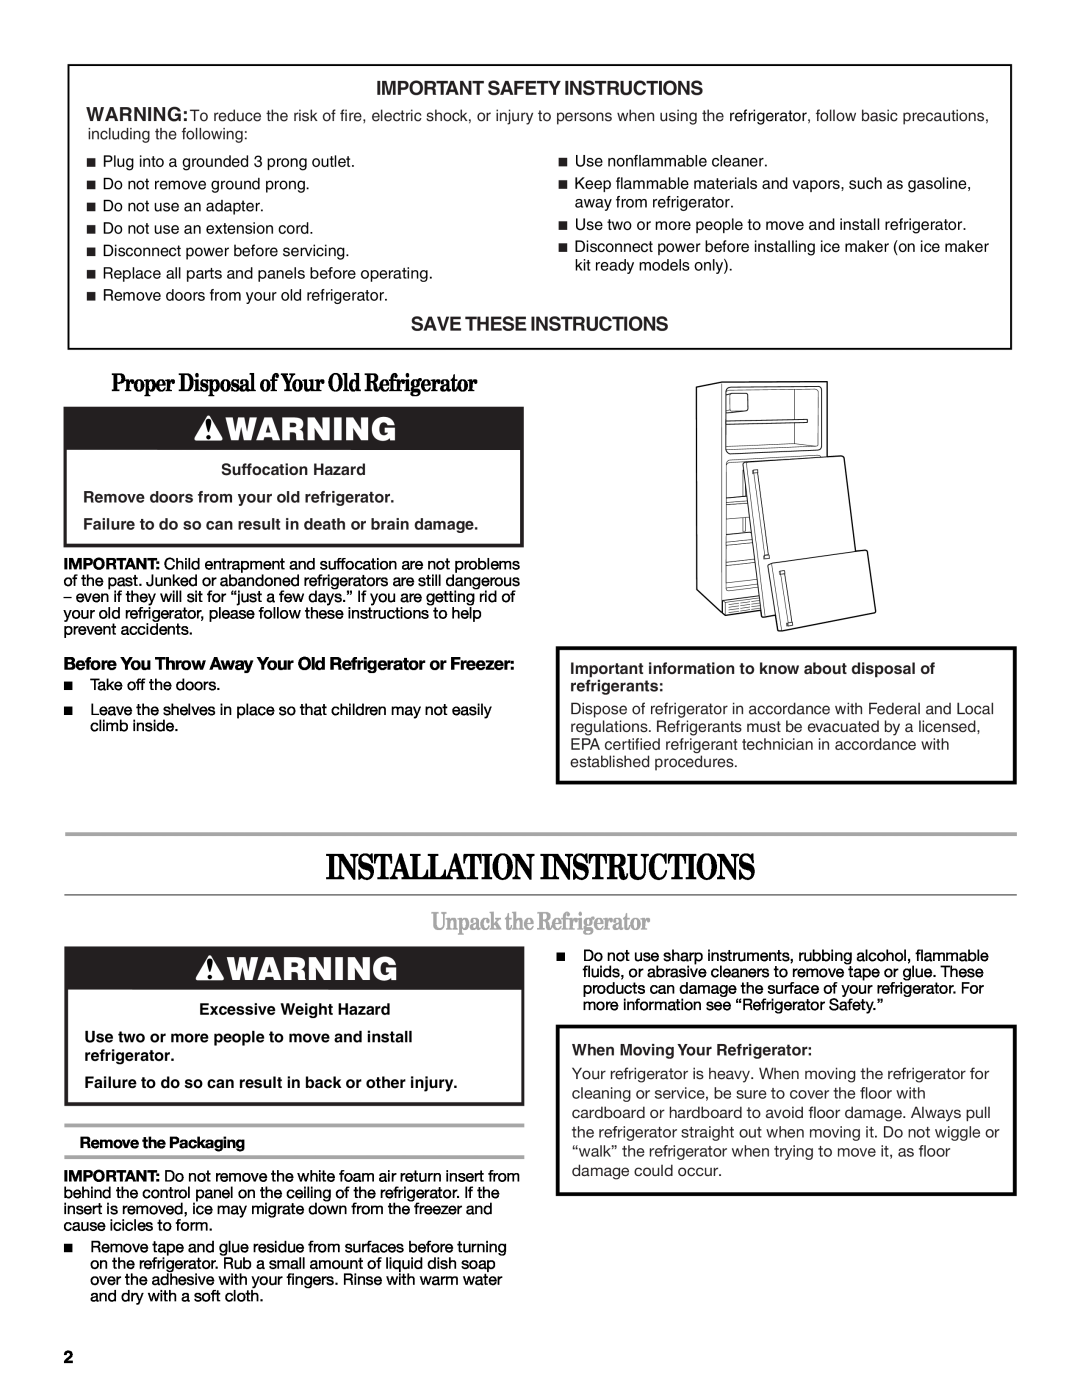 Whirlpool W10359303A Installation Instructions, Proper Disposal of Your Old Refrigerator, Unpack the Refrigerator 